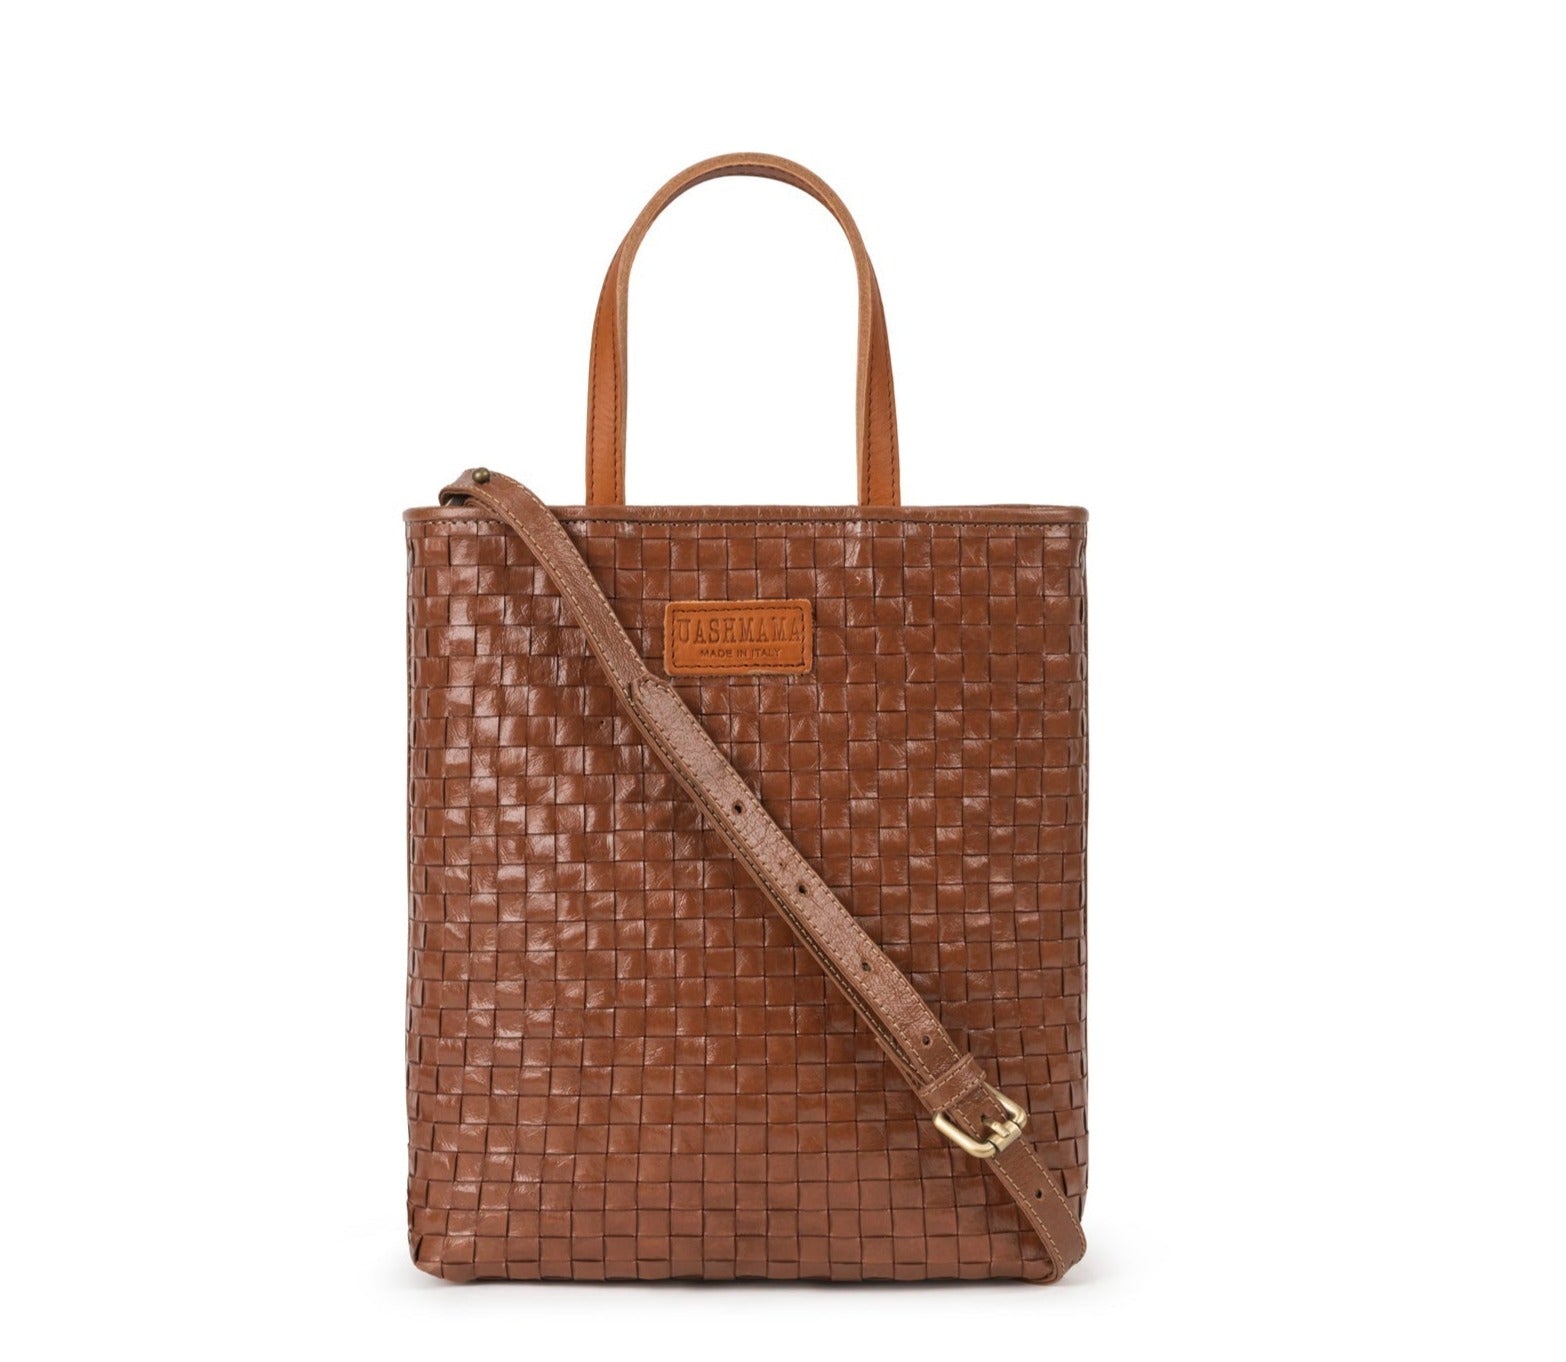 A woven washable paper tote bag is shown from the front angle. It has two top handles and a long shoulder strap. It is brown in colour.